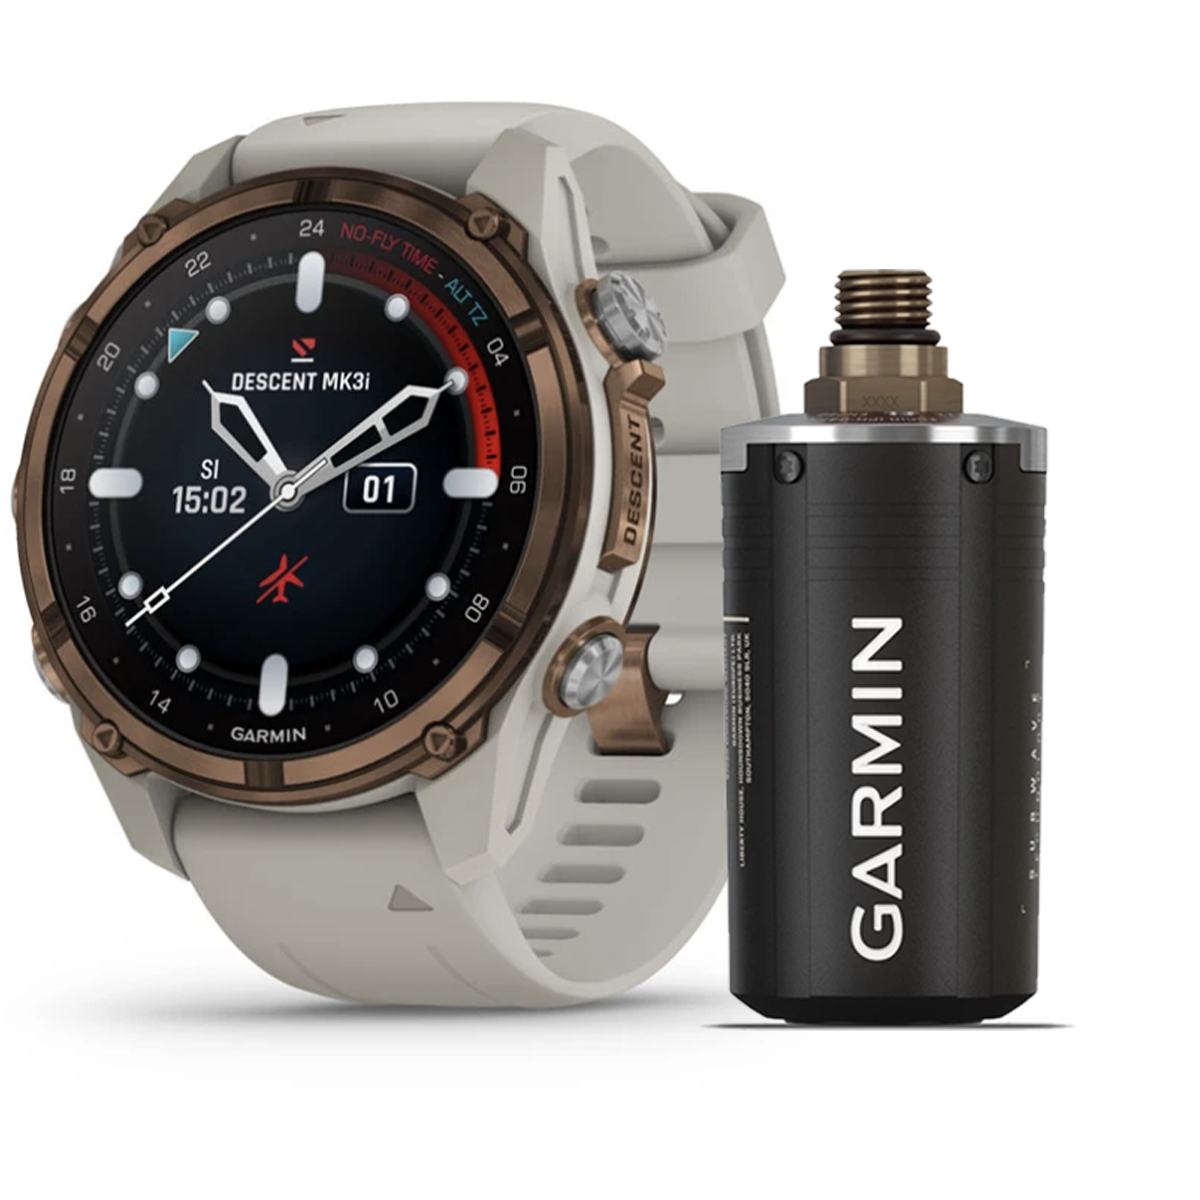 Смарт-годинник Garmin Descent Mk3i – 43 mm Bronze PVD Titanium with French Gray Silicone Band and Descent T2 Transceiver (BNDL-DMK3-43TFDT2)